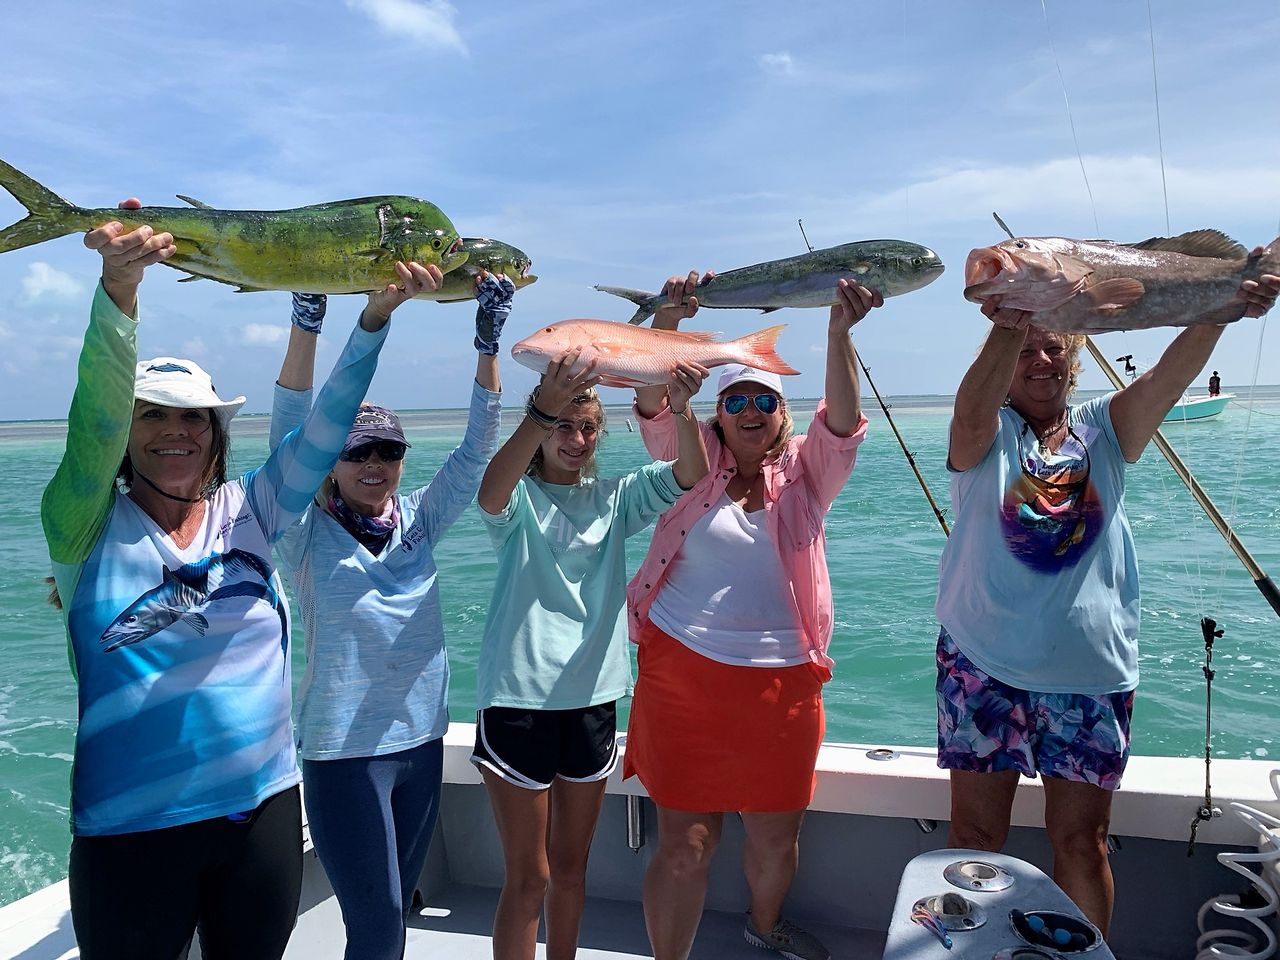 For over 20 years the popular girls' getaway has offered a unique vacation where women can network and enjoy the Florida Keys and its remarkable fishing.